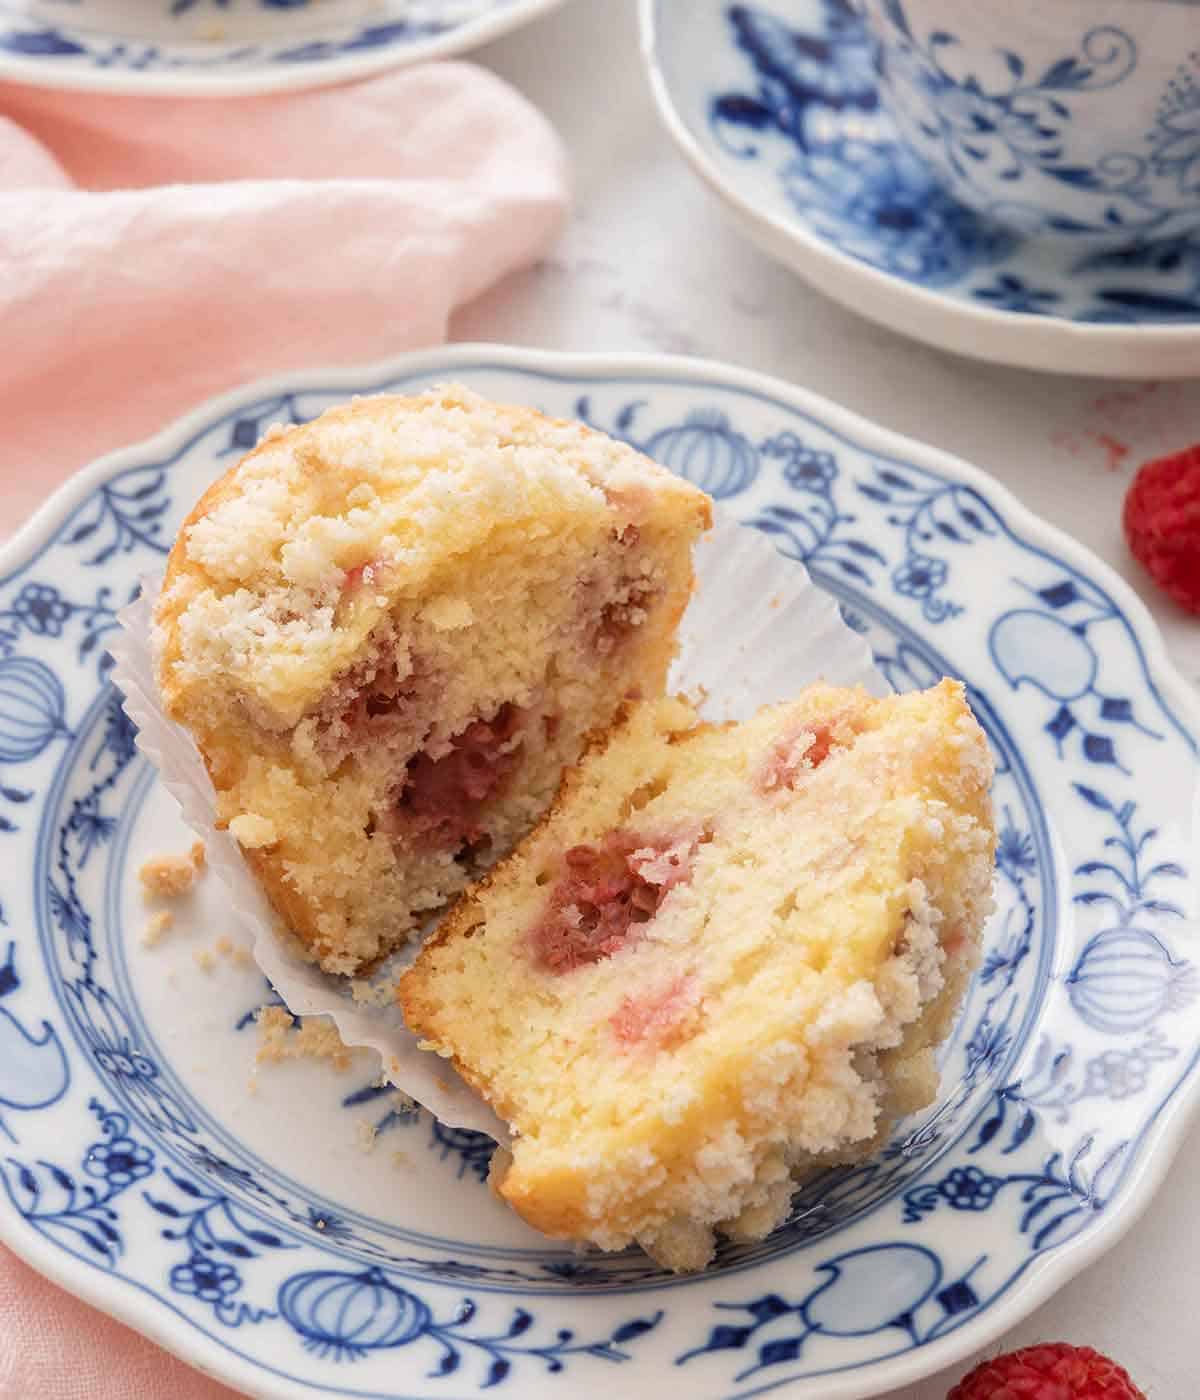 A raspberry muffin cut in half in the muffin liner on a blue and white plate.